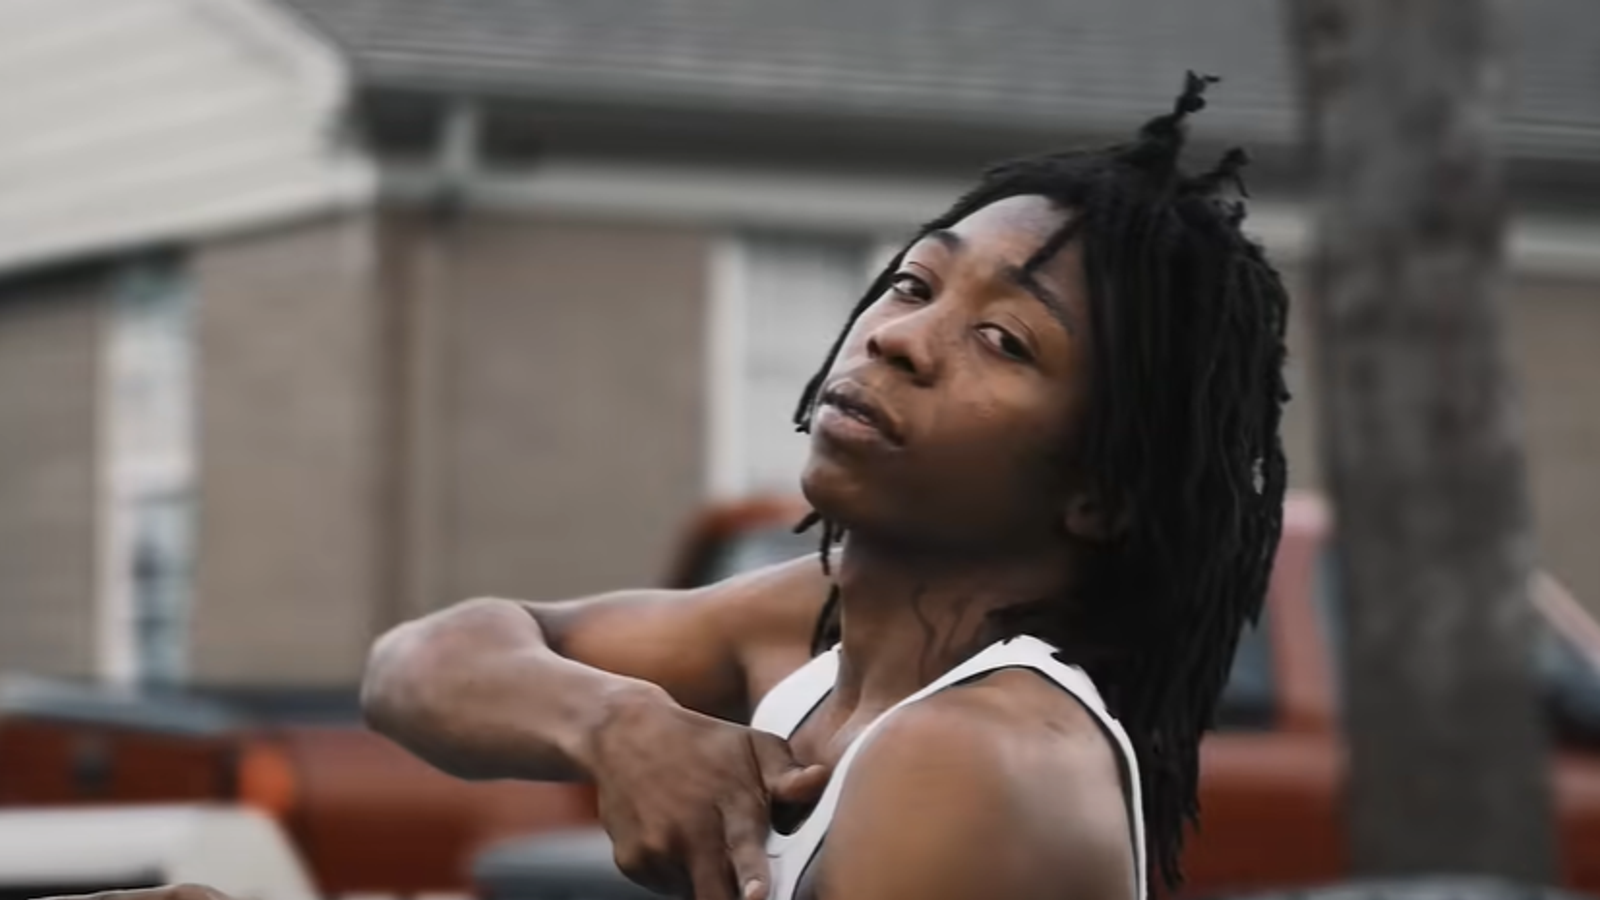 Lil Loaded, Texas rapper known for track '6locc 6a6y', has died aged 20